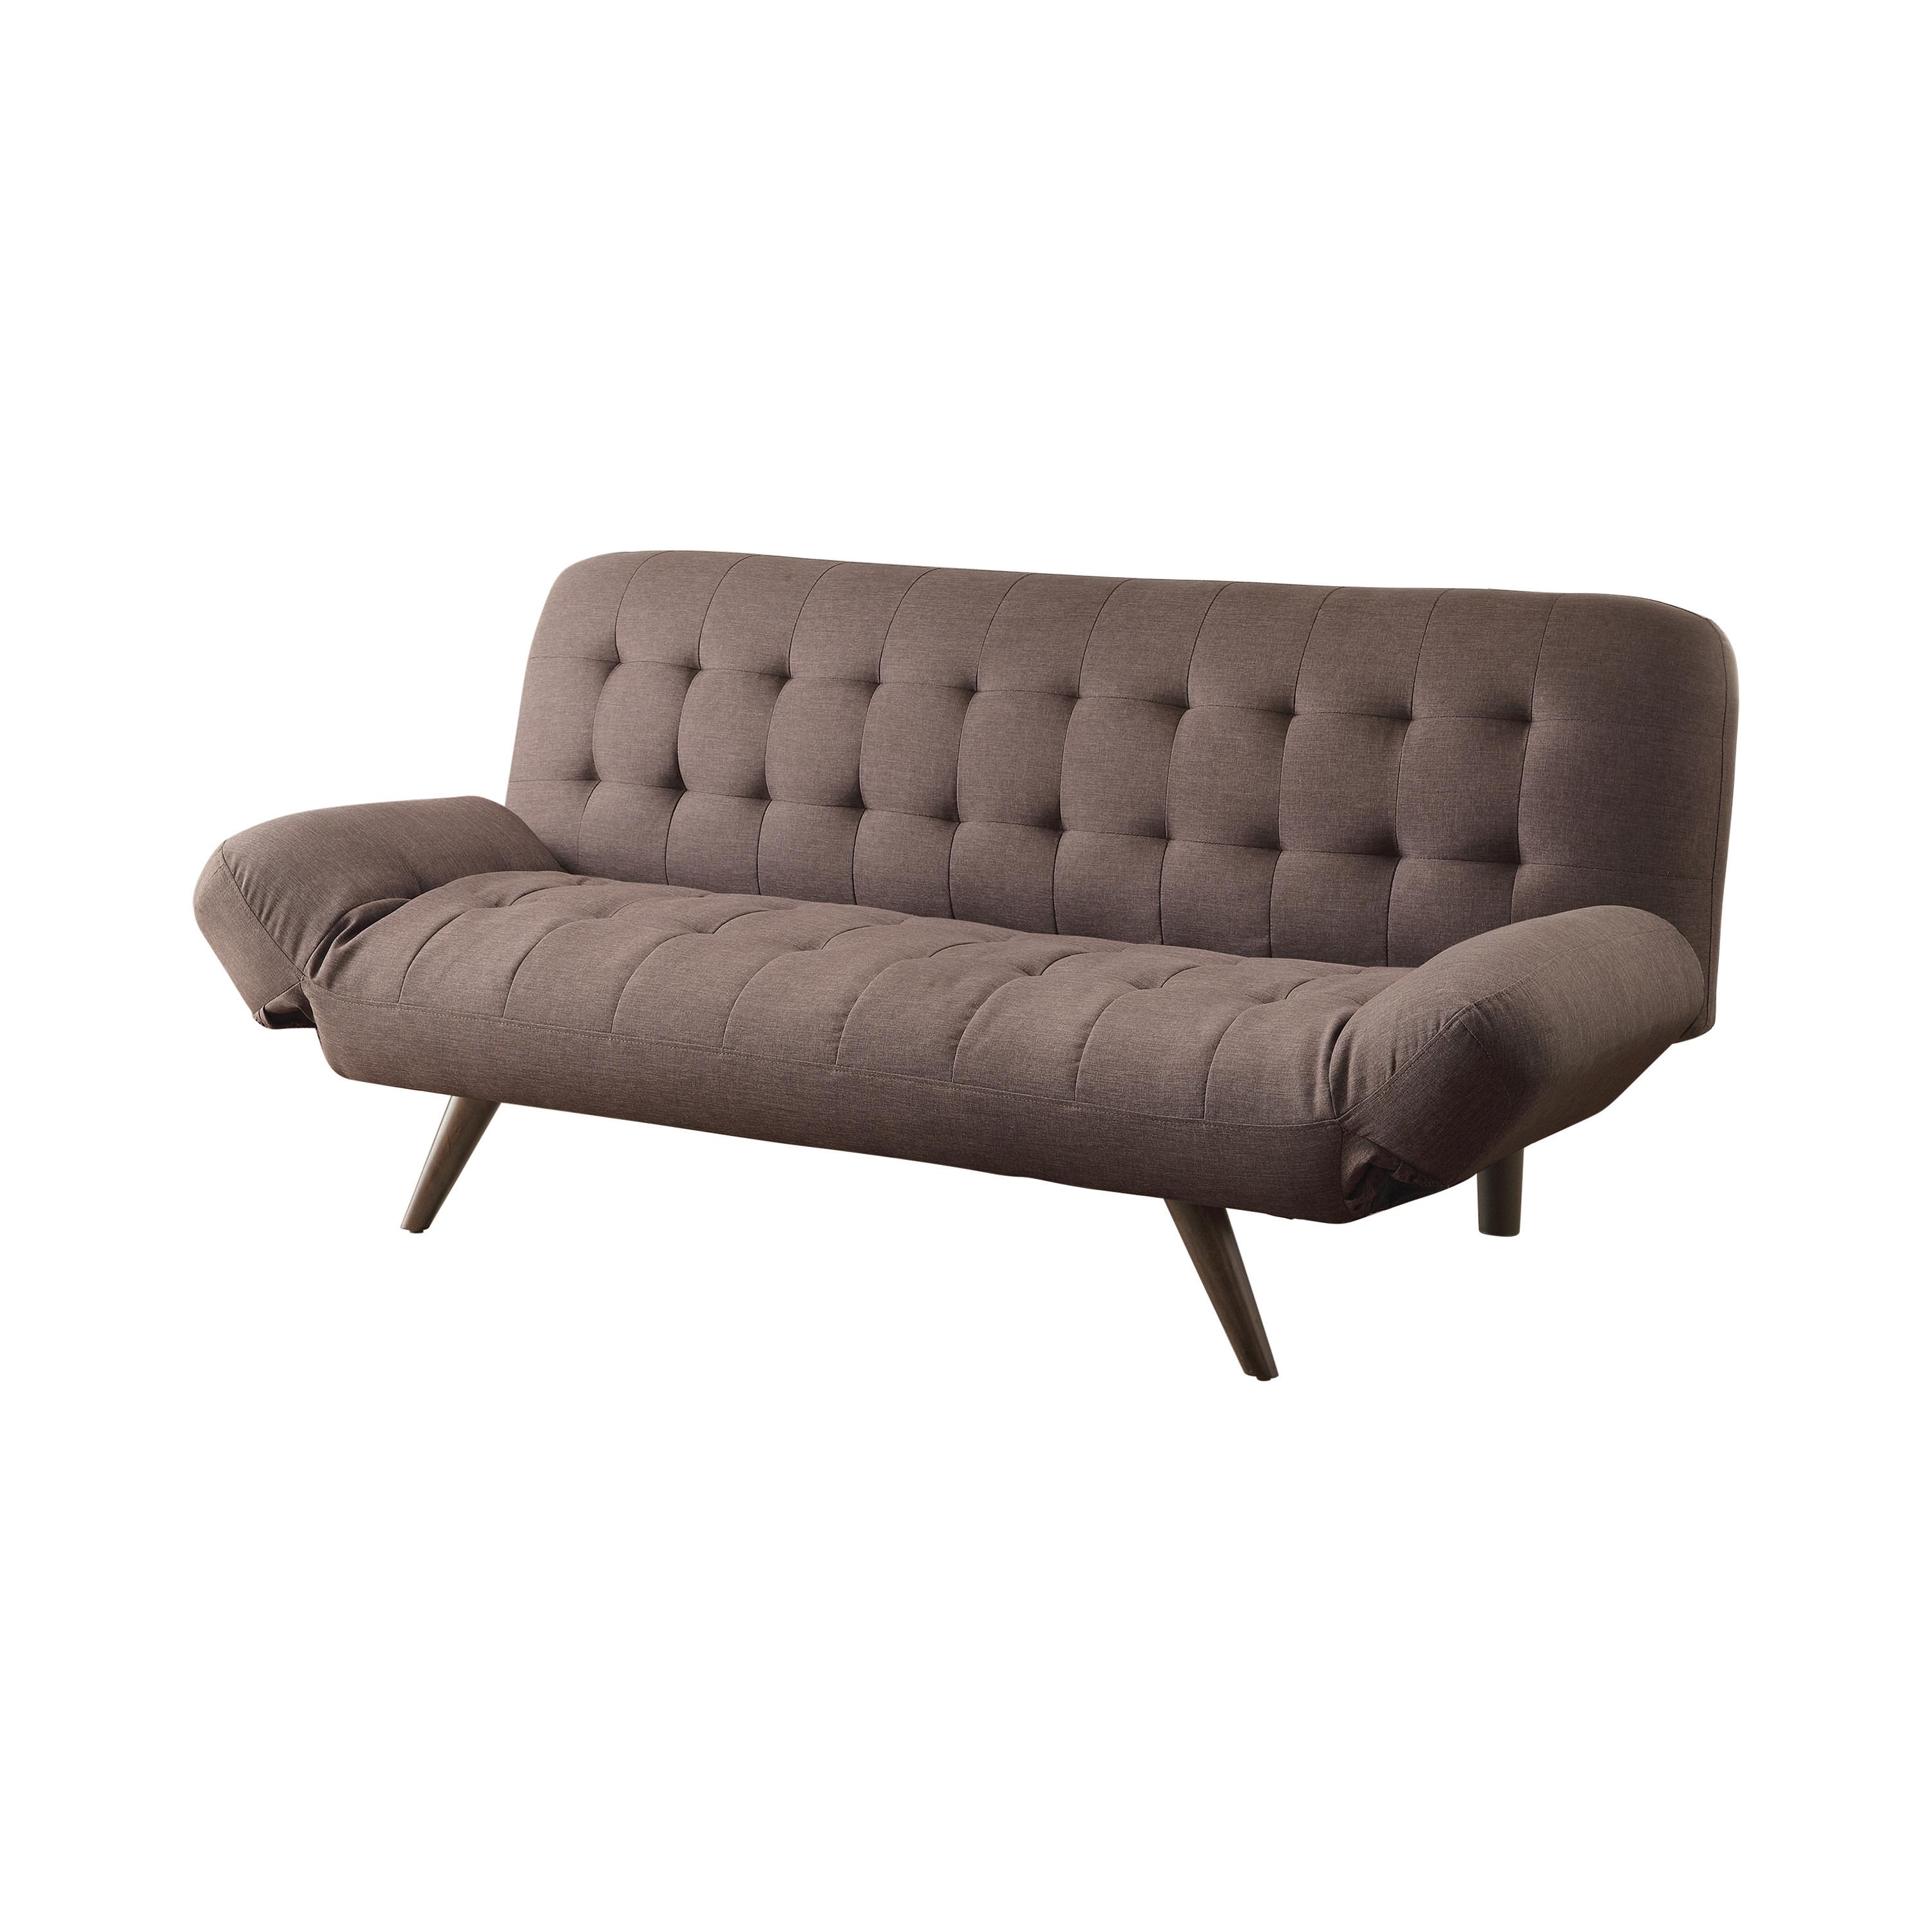 Modern Sofa bed 500041 Janet 500041 in Gray 